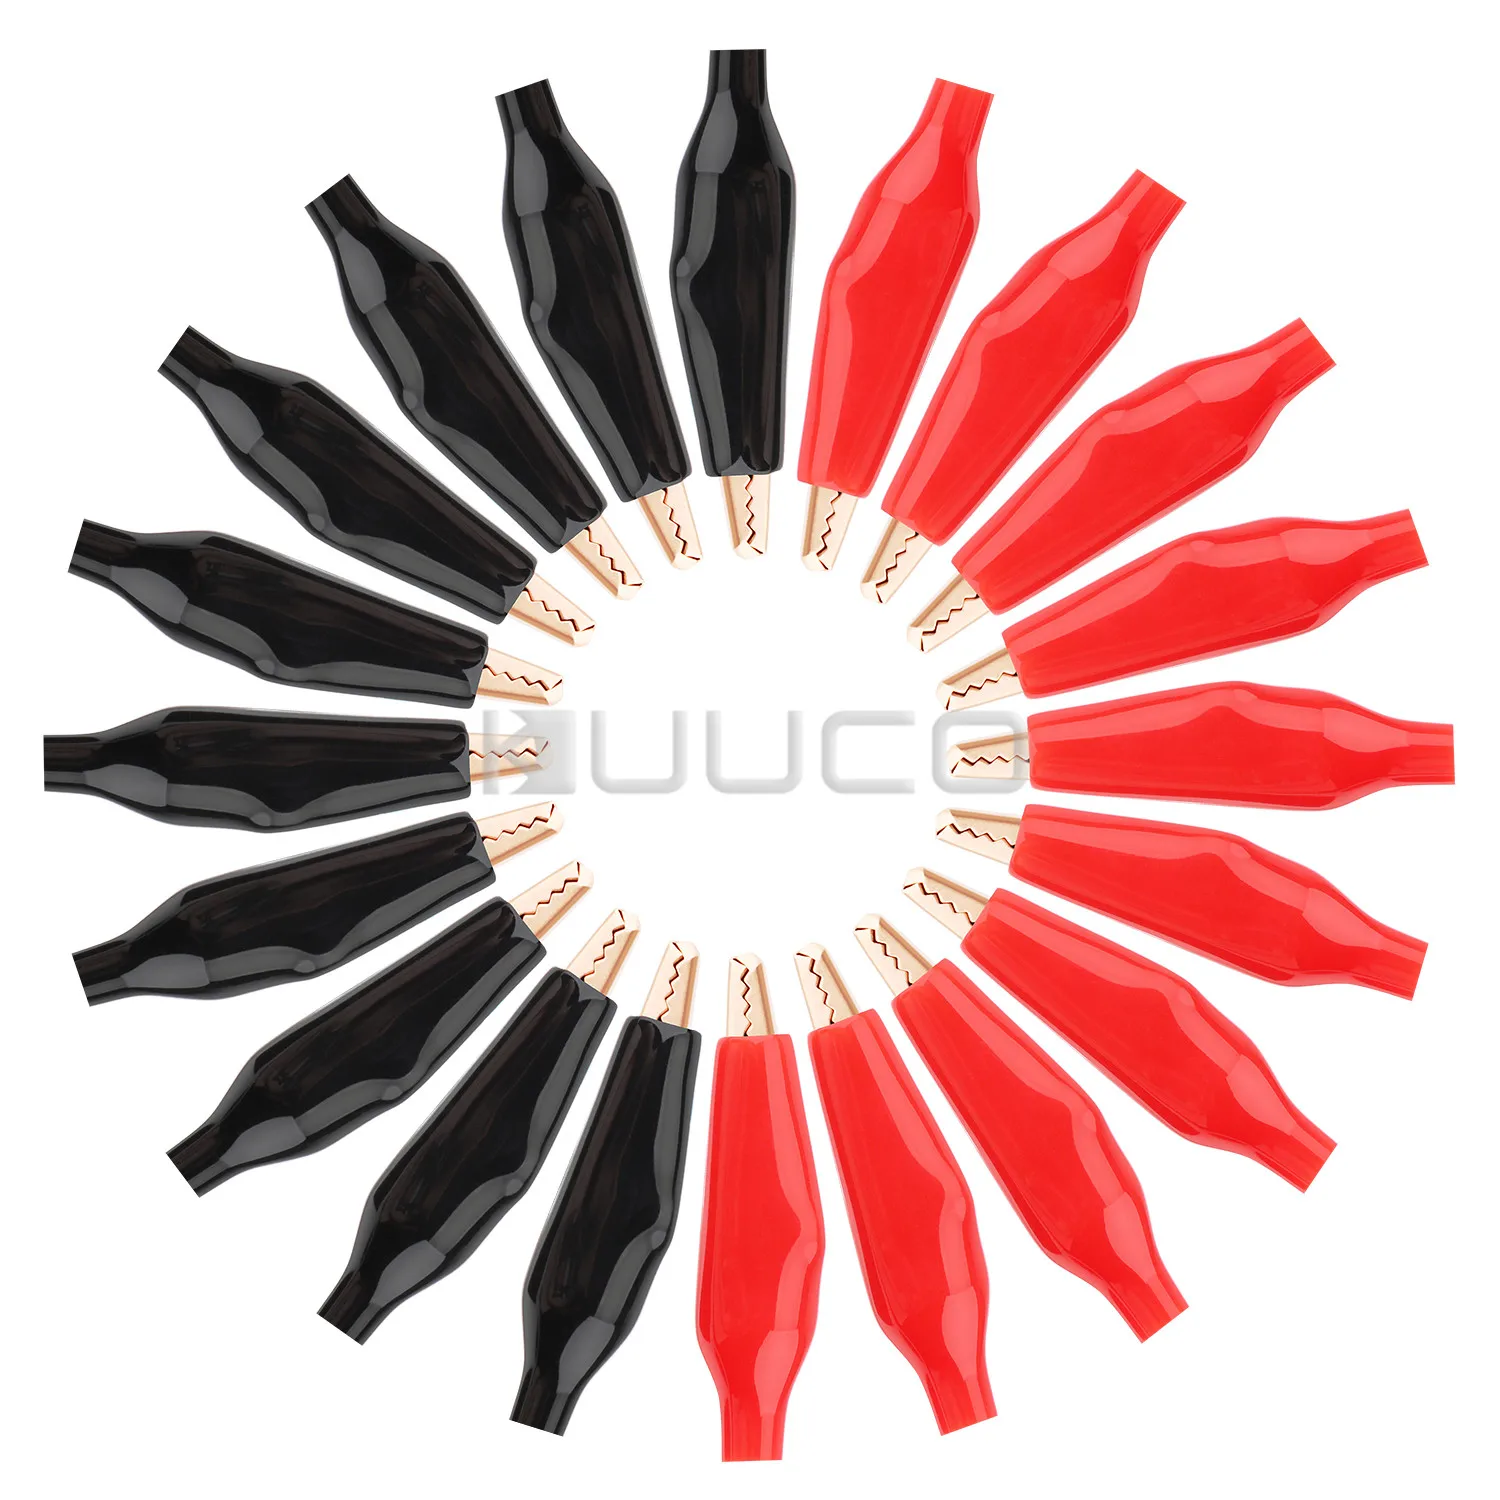 20 pcs Alligator Clip Battery Clamp Test Probe Electrical  Boot Black Red 35mm 